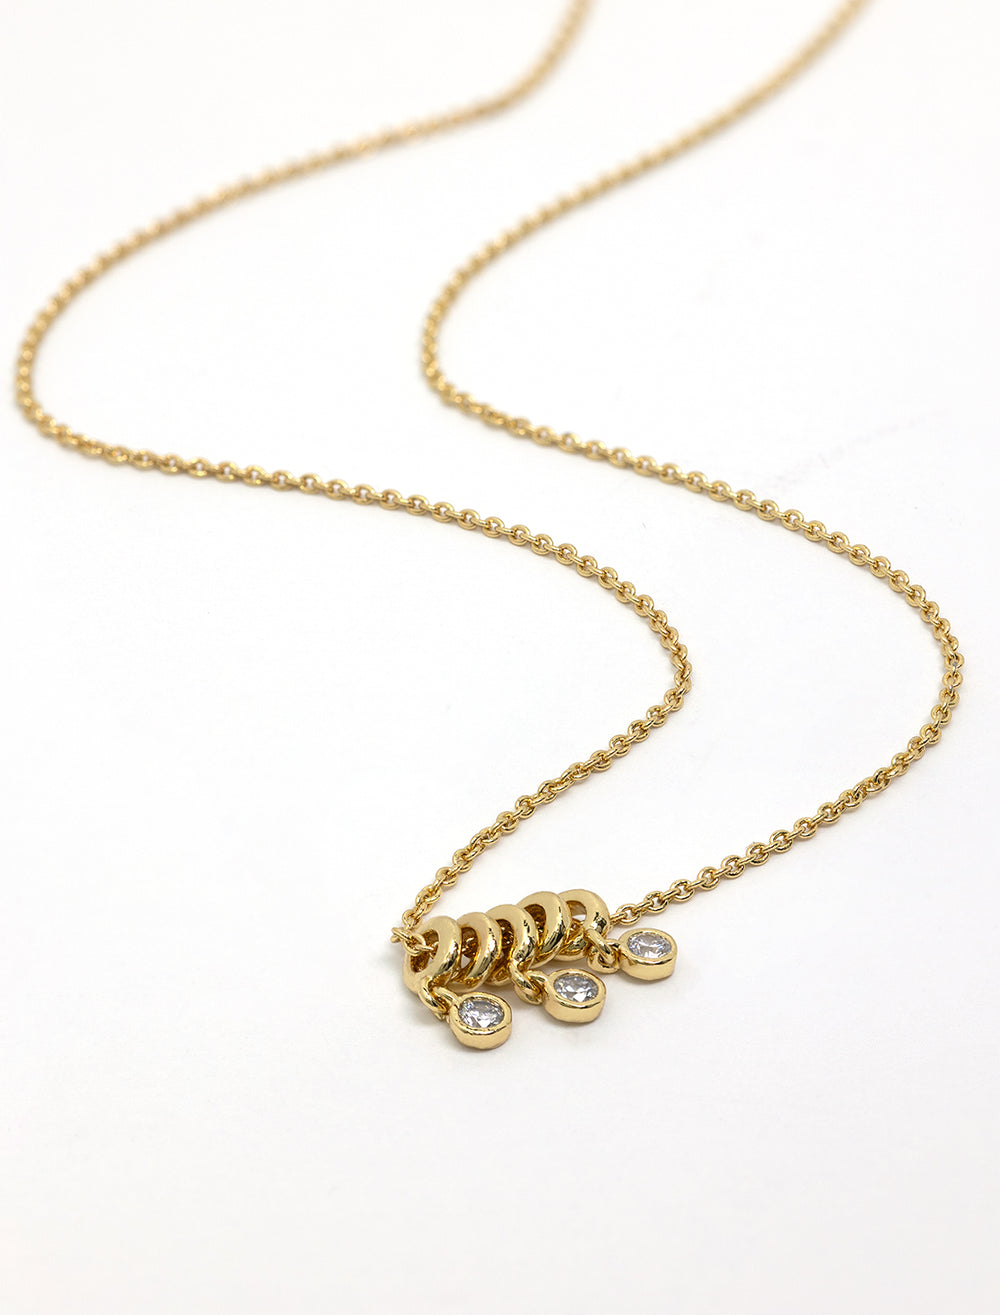 Stylized laydown of Tai's necklace with gold rings and cz dangles.